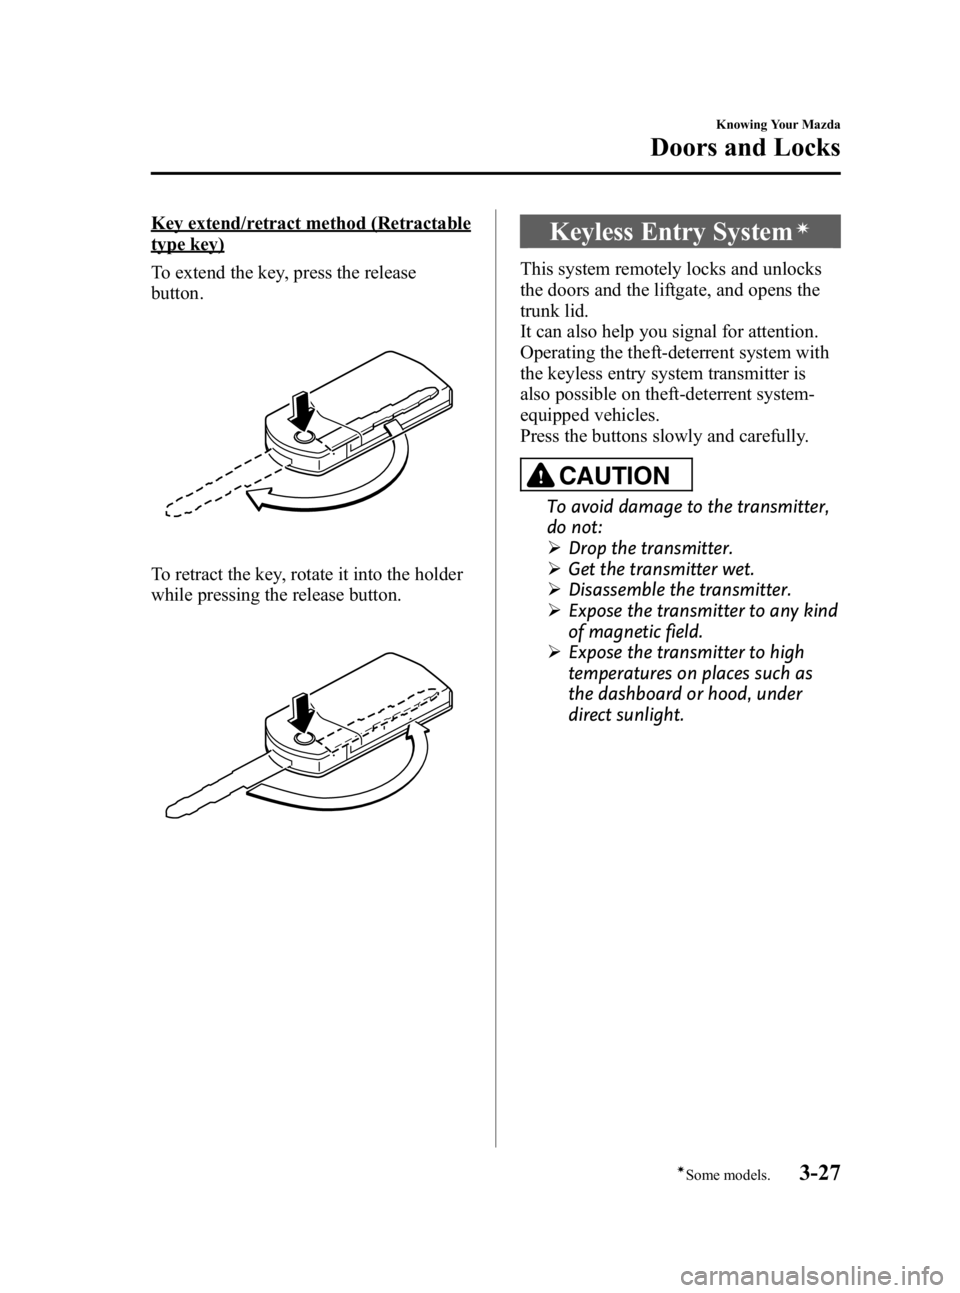 MAZDA MODEL 3 5-DOOR 2010  Owners Manual Black plate (103,1)
Key extend/retract method (Retractable
type key)
To extend the key, press the release
button.
To retract the key, rotate it into the holder
while pressing the release button.
Keyle